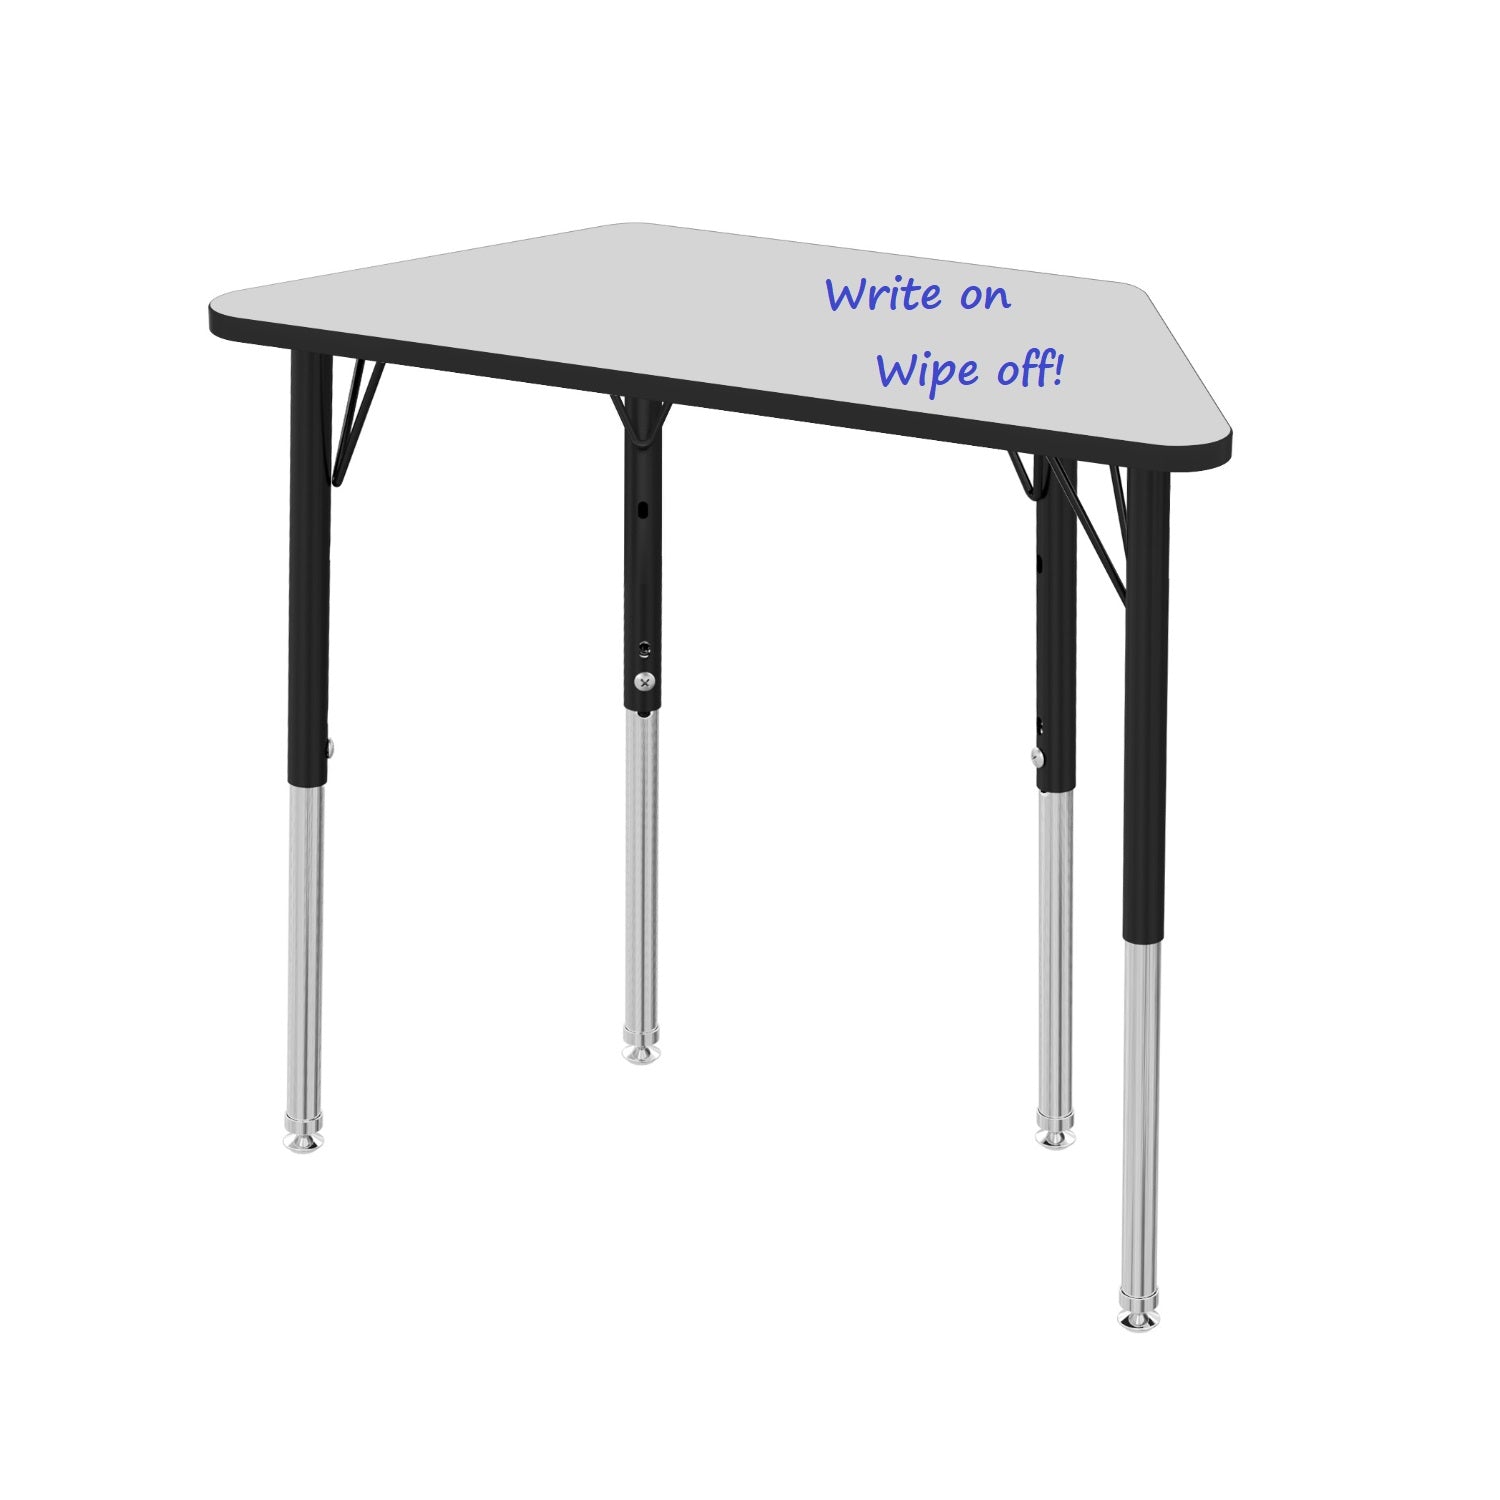 MG Series Adjustable Height Activity Table with White Dry Erase Markerboard Top, 24" x 48" Trapezoid